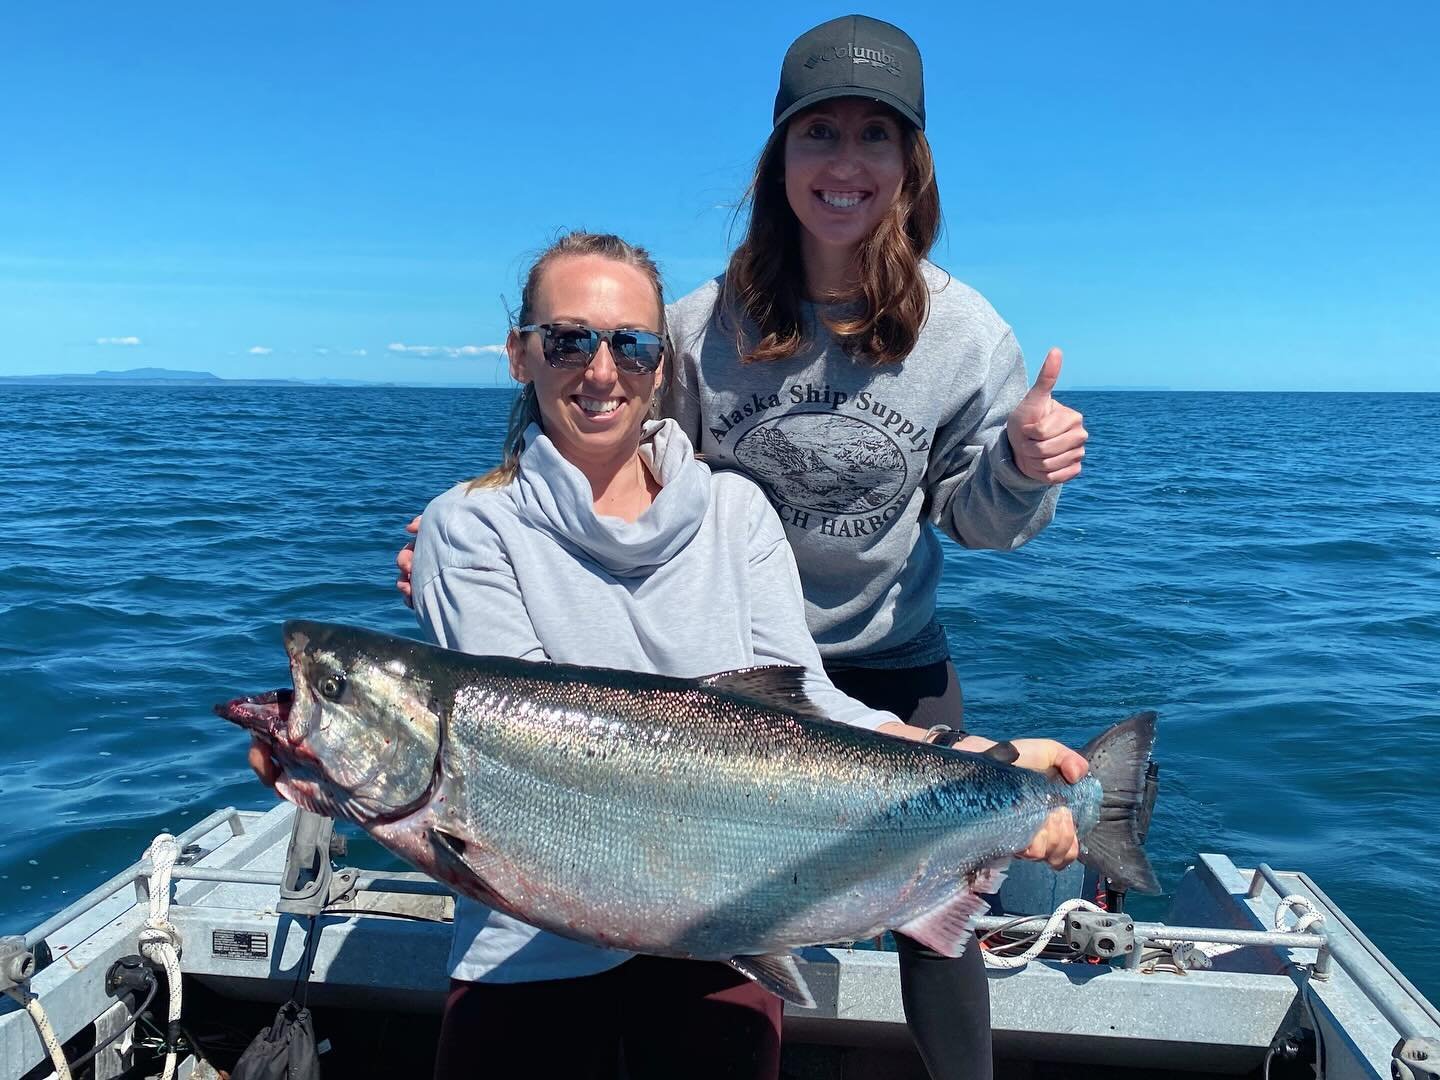 Sarah&rsquo;s favorite fish to eat, to catch, to pose with, is King Salmon. What&rsquo;s yours? 🌊